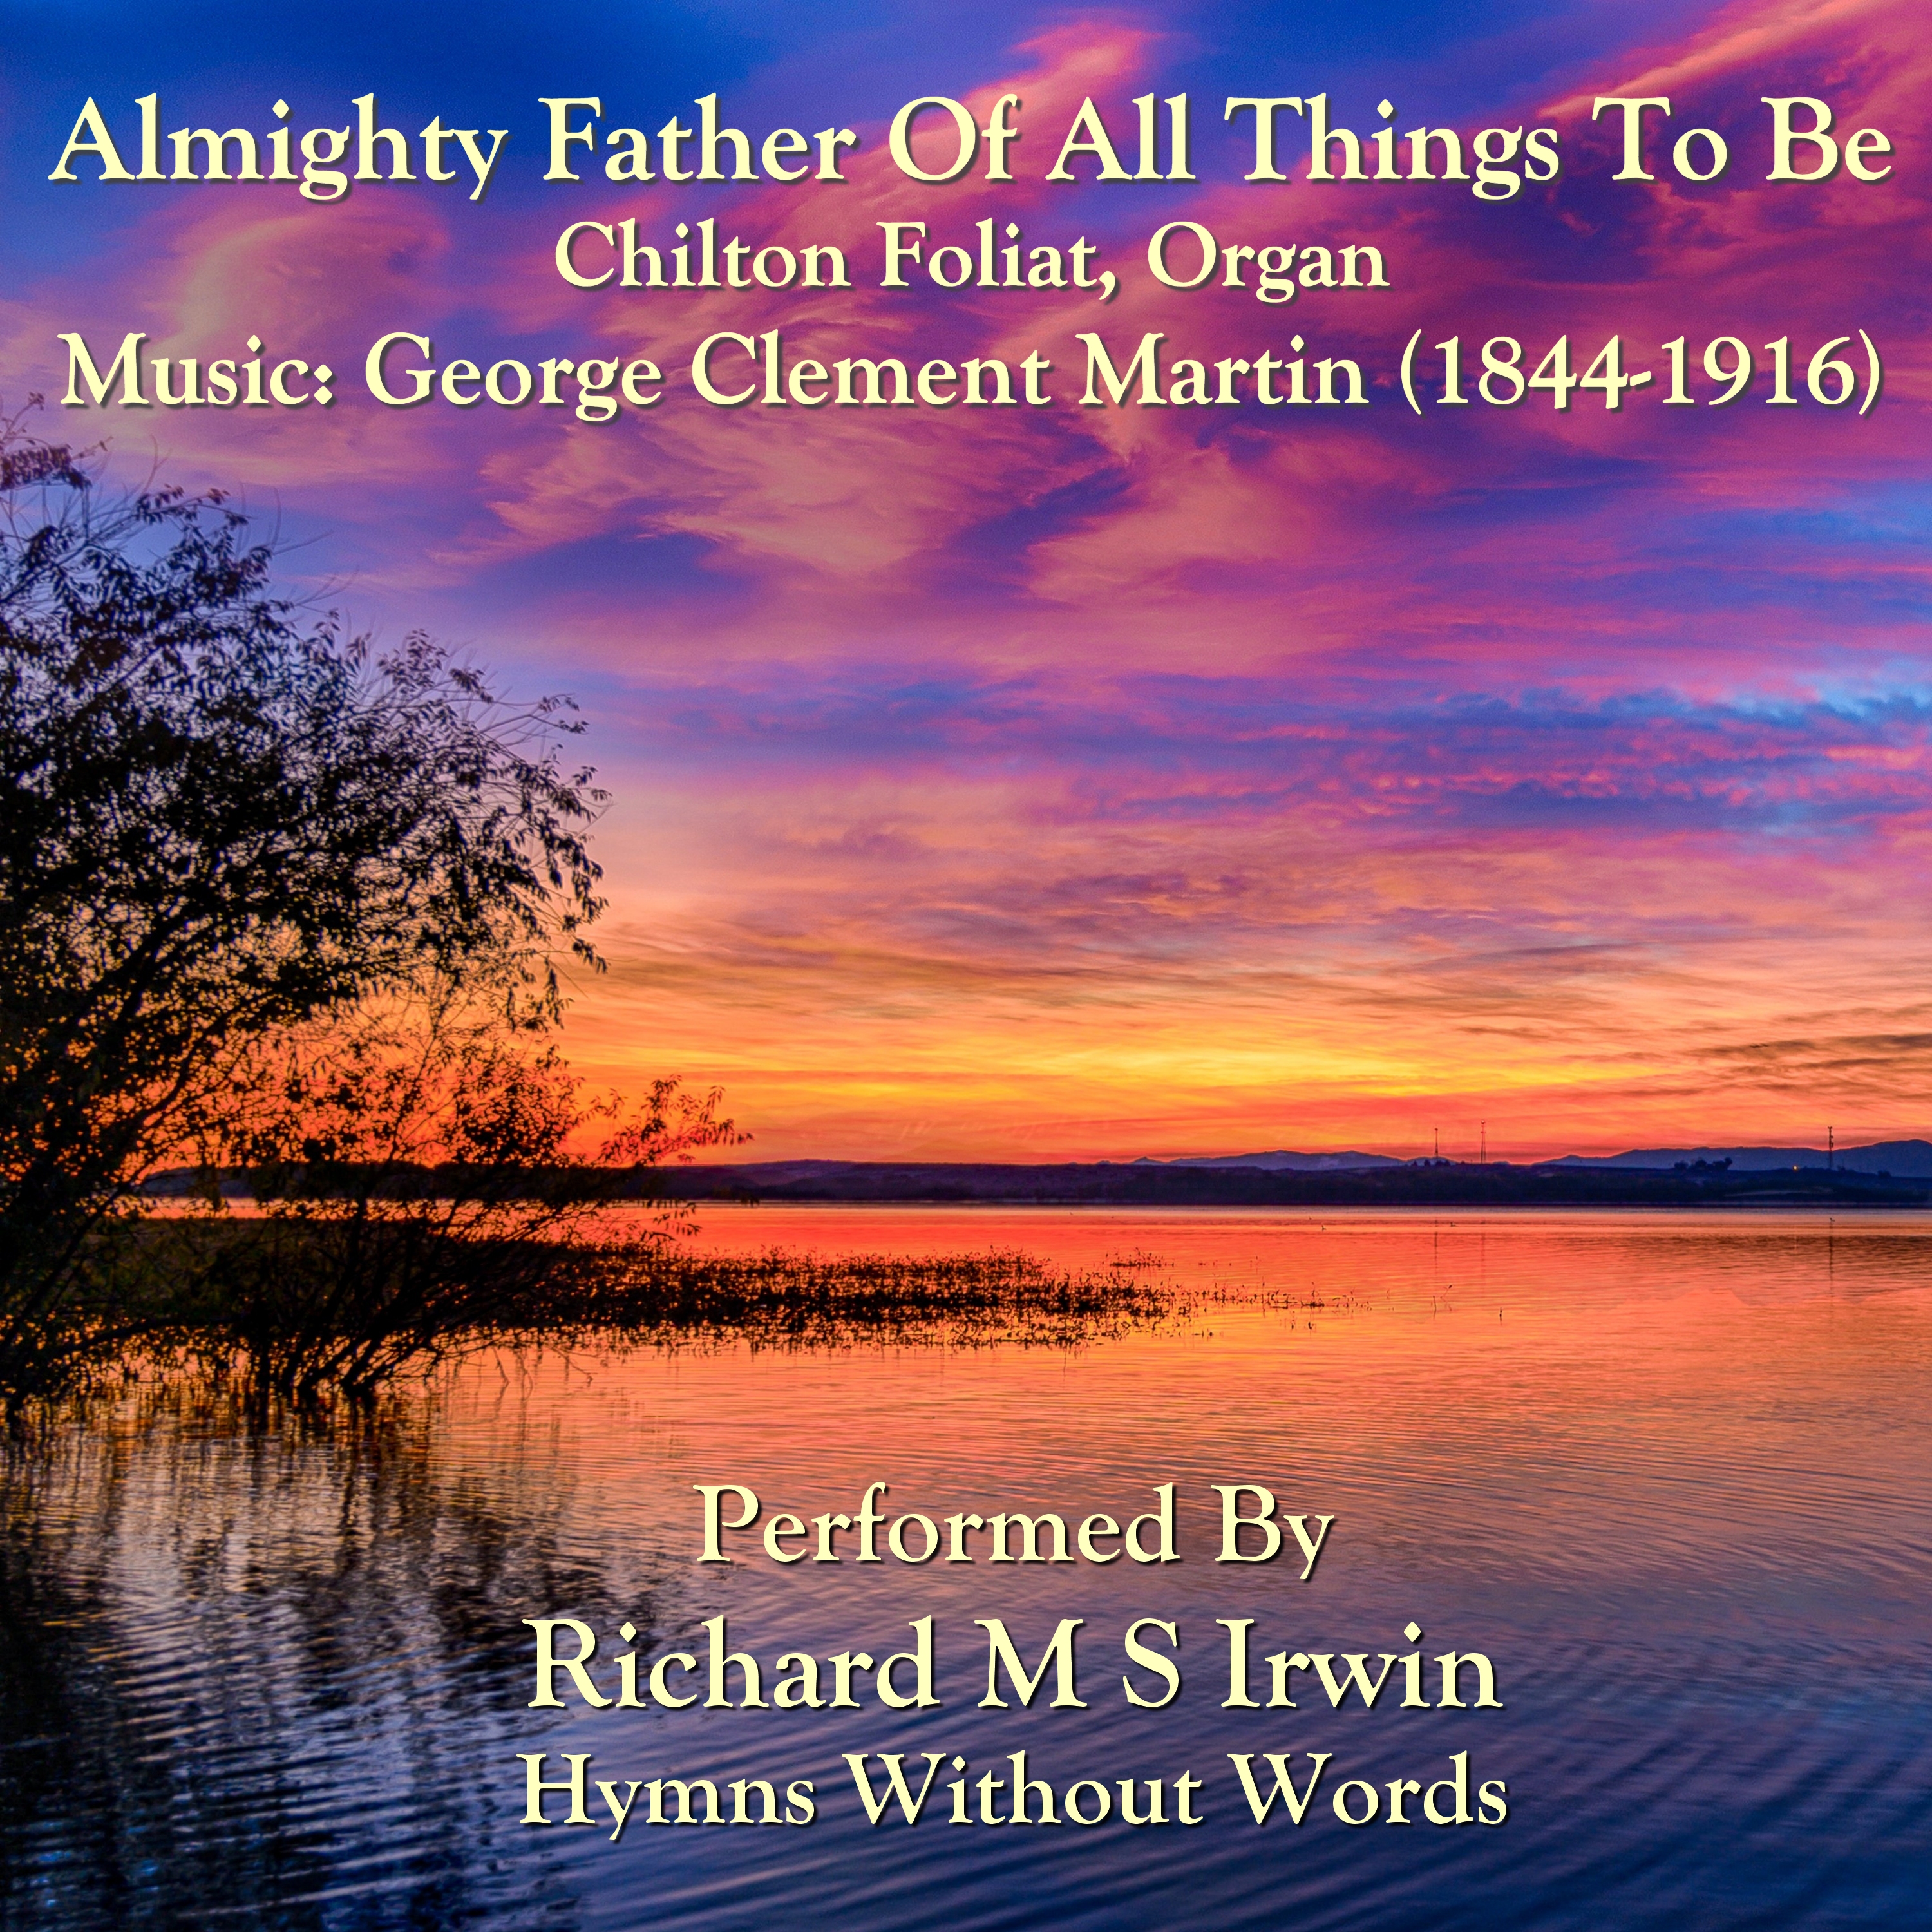 Almighty Father Of All Things To Be (Chilton Foliat, Organ)